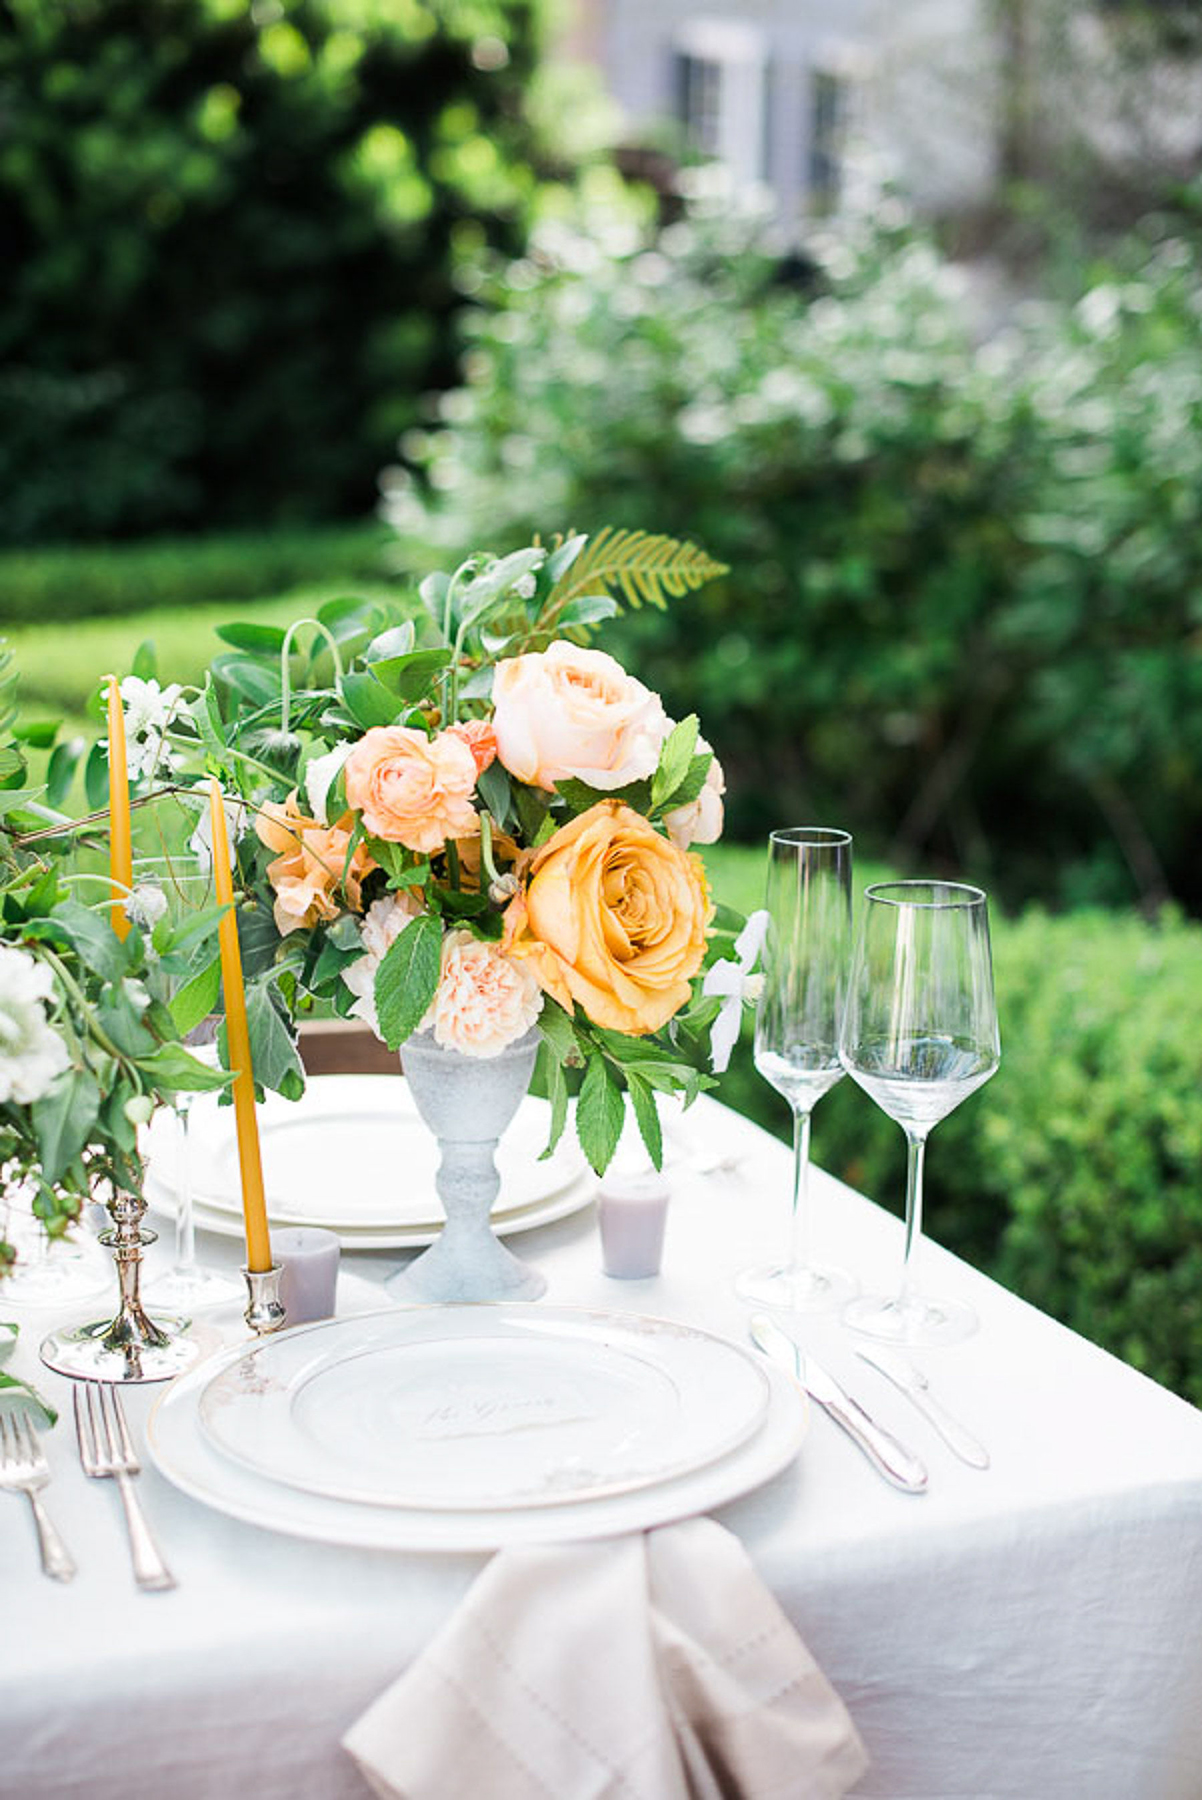 Outdoor table setting with yellow roses